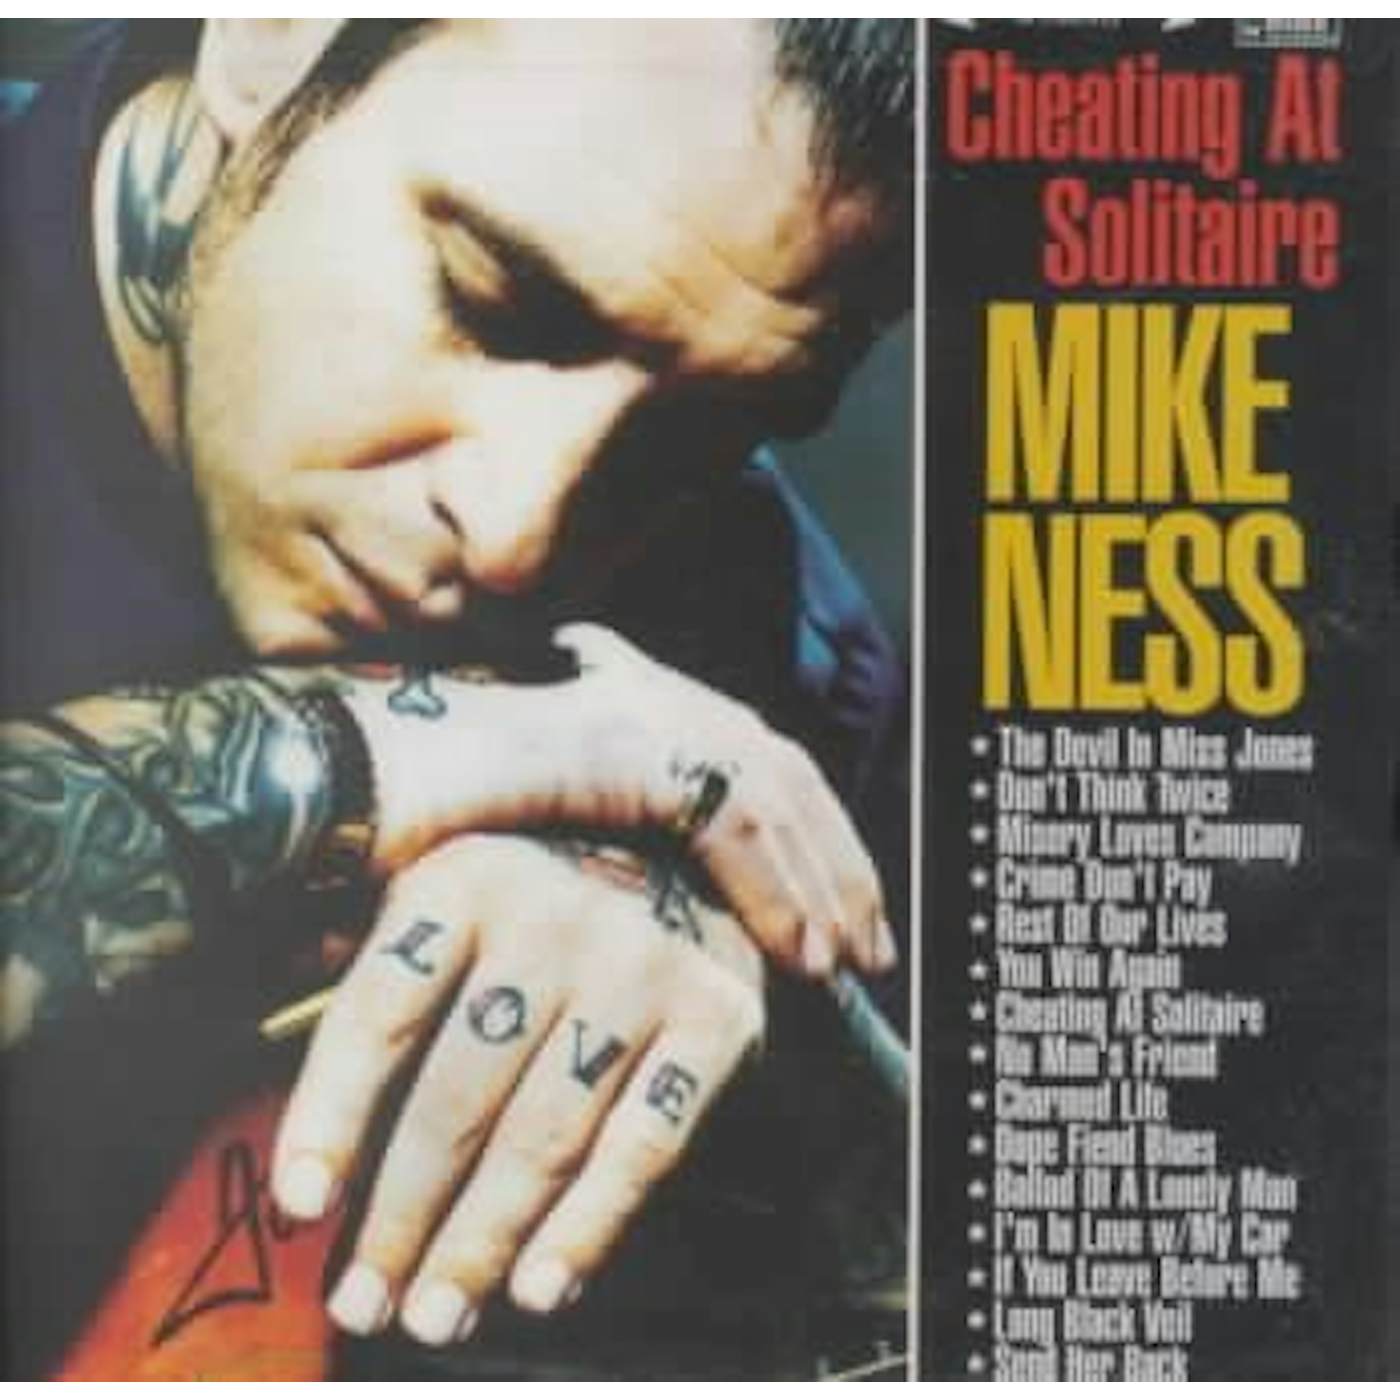 Mike Ness Cheating At Solitaire CD